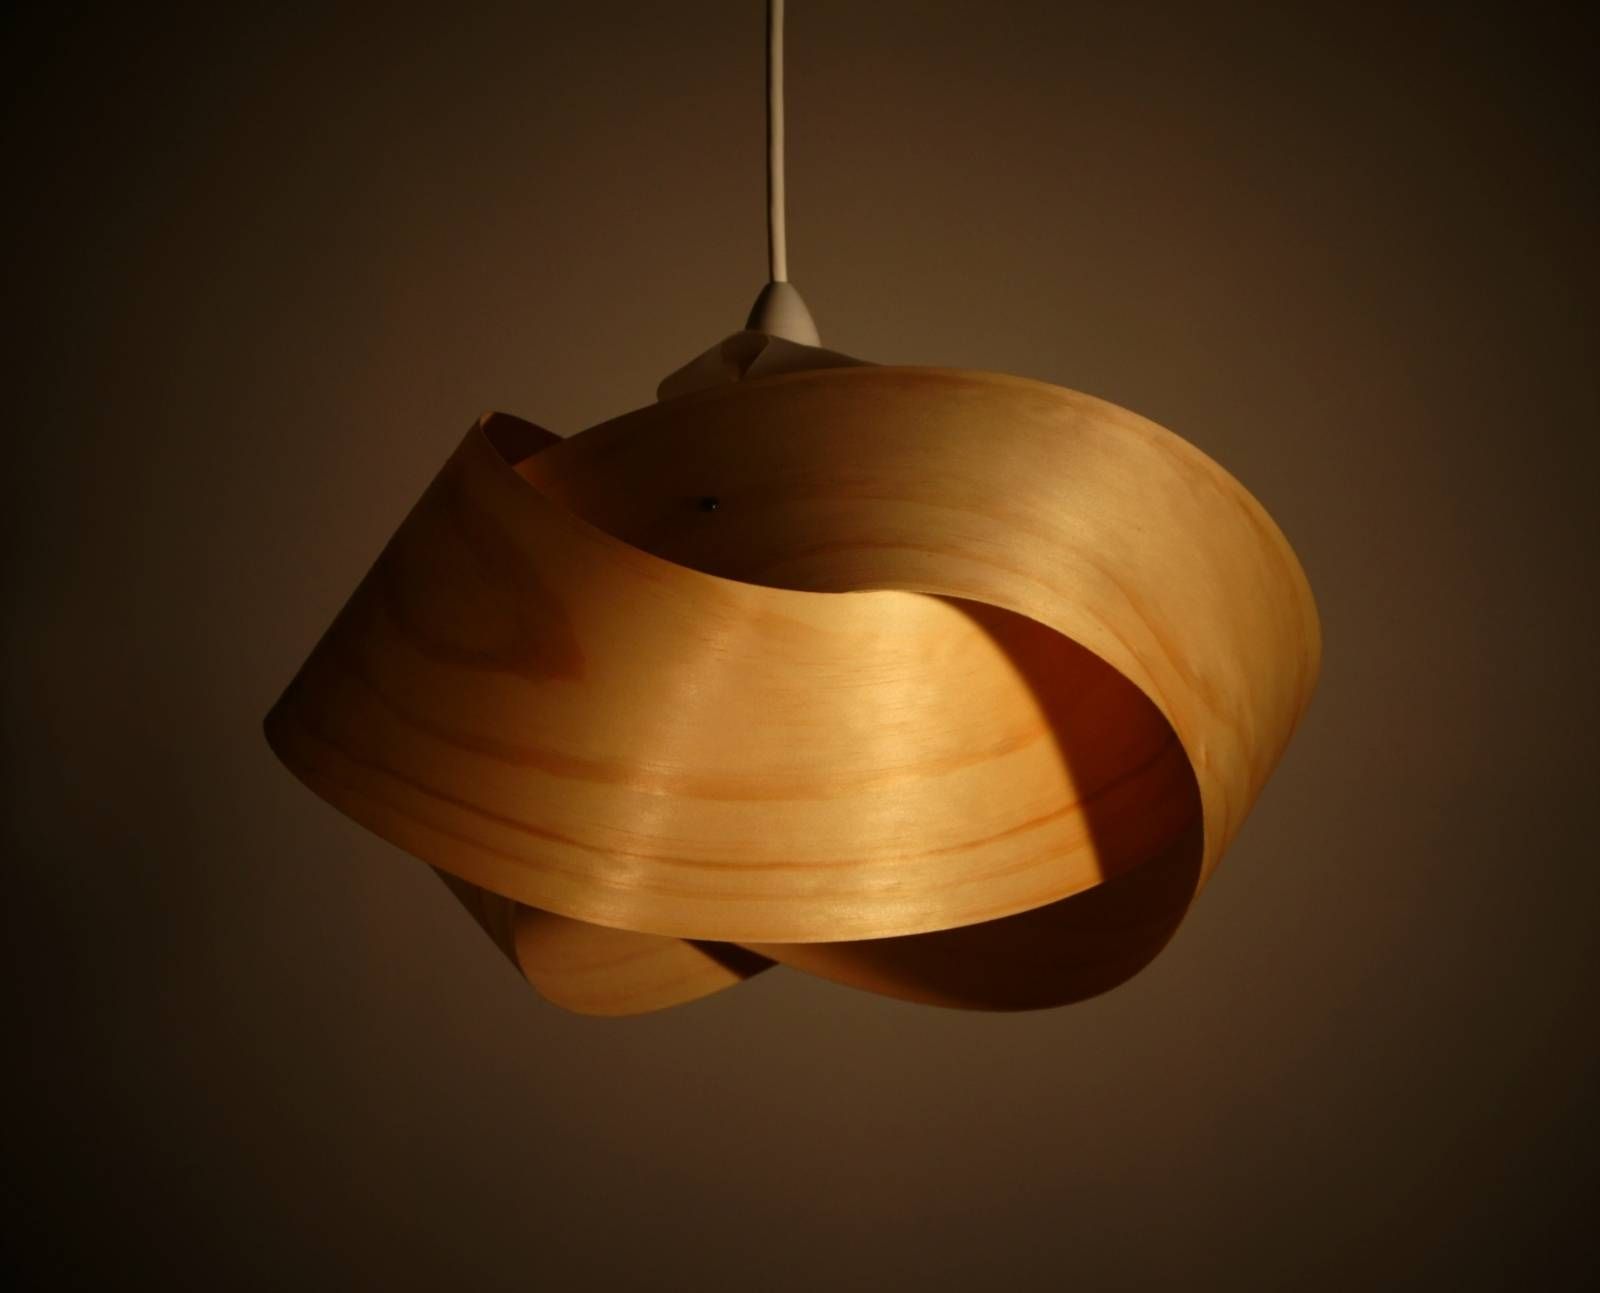 Wooden Tripod Lamp And Veneer Shade Including Awesome Light With Wood Veneer Lighting (View 3 of 15)